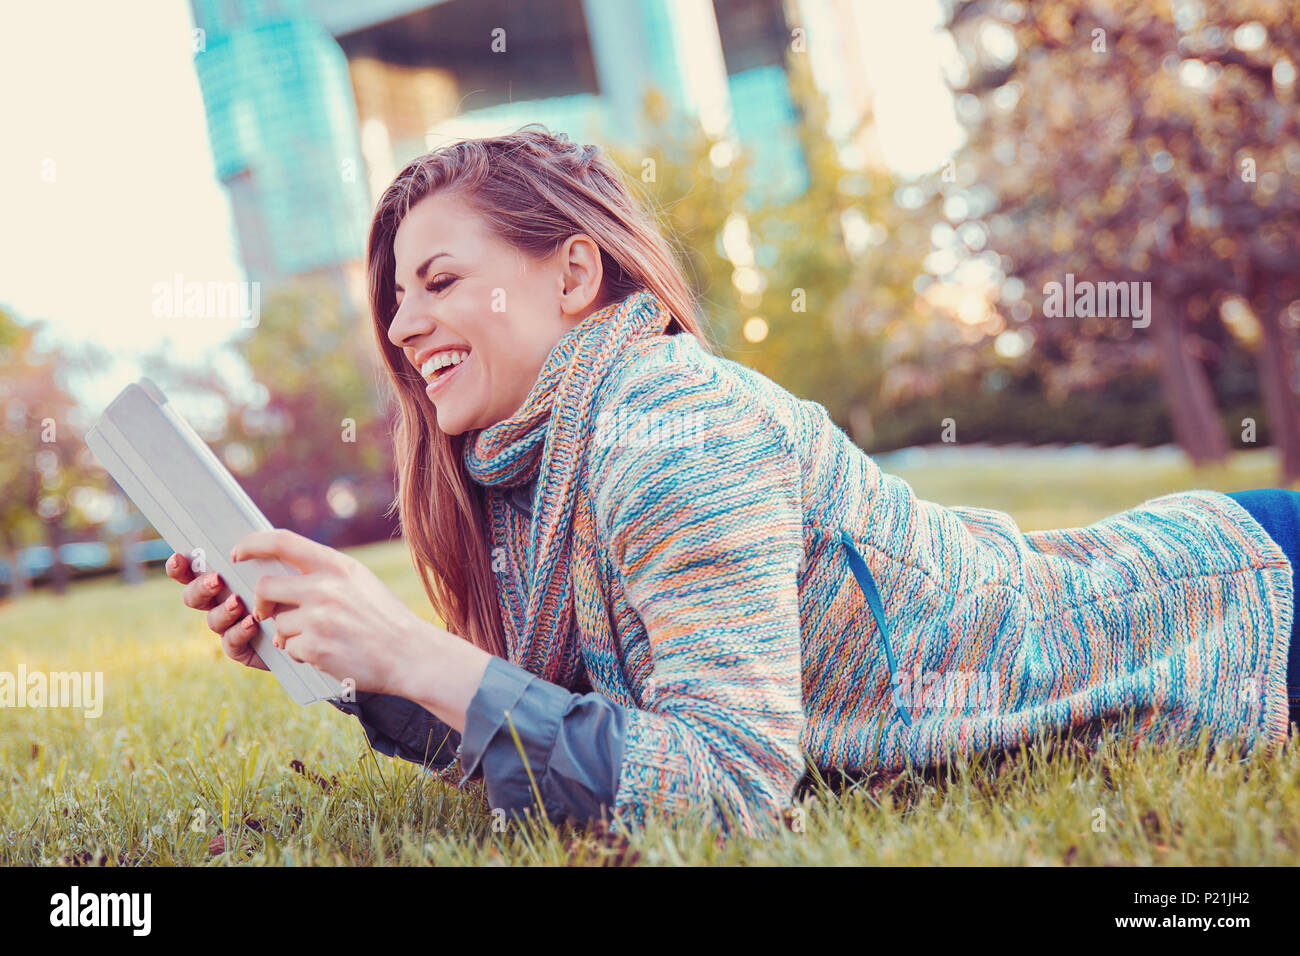 Young woman using tablet computer outdoors laying on grass in a city park, smiling. Stock Photo